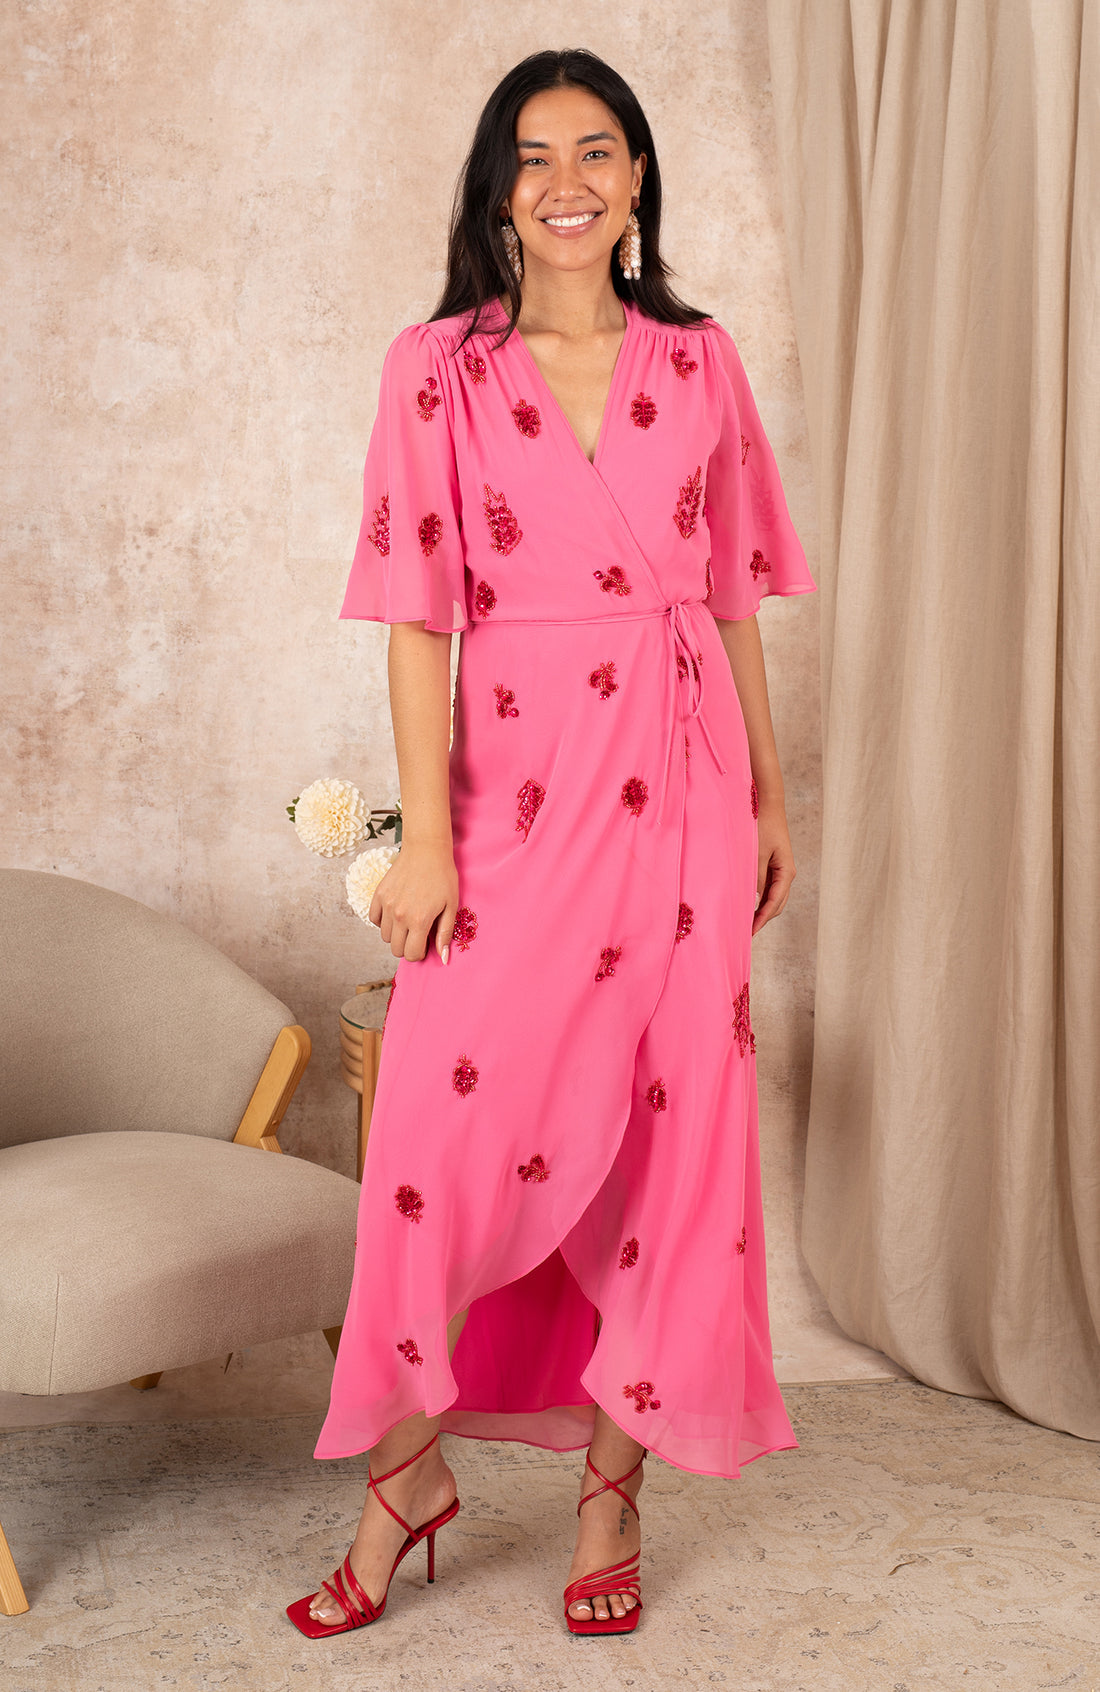 THE HEBE EMBELLISHED WRAP DRESS WITH TIE WAIST AND FLUTTER SLEEVE (PINK/RED)